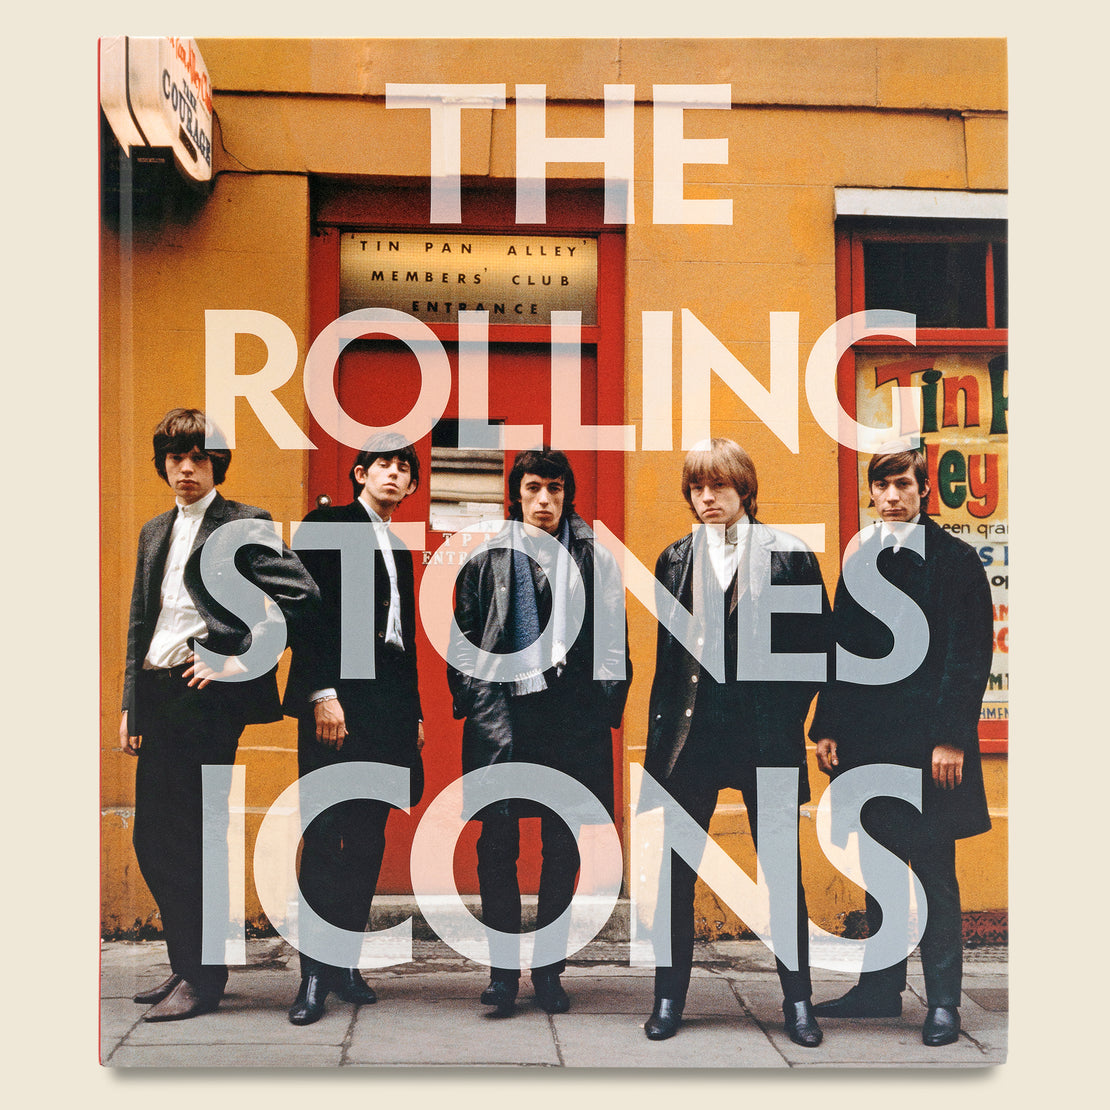 Bookstore The Rolling Stones: Icons